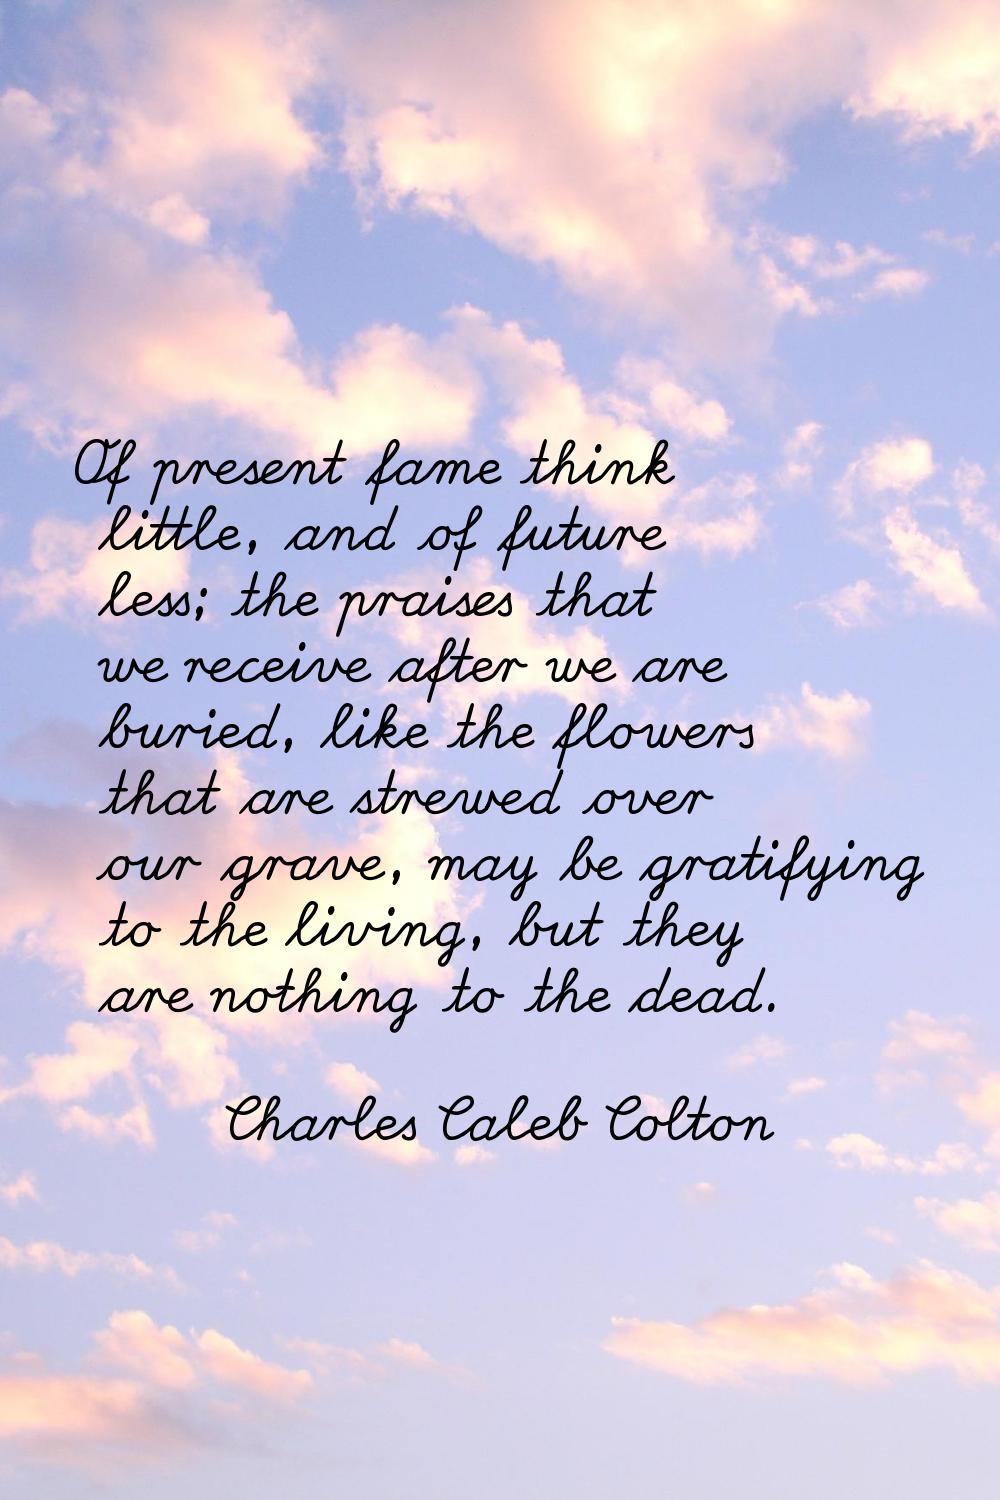 Of present fame think little, and of future less; the praises that we receive after we are buried, 